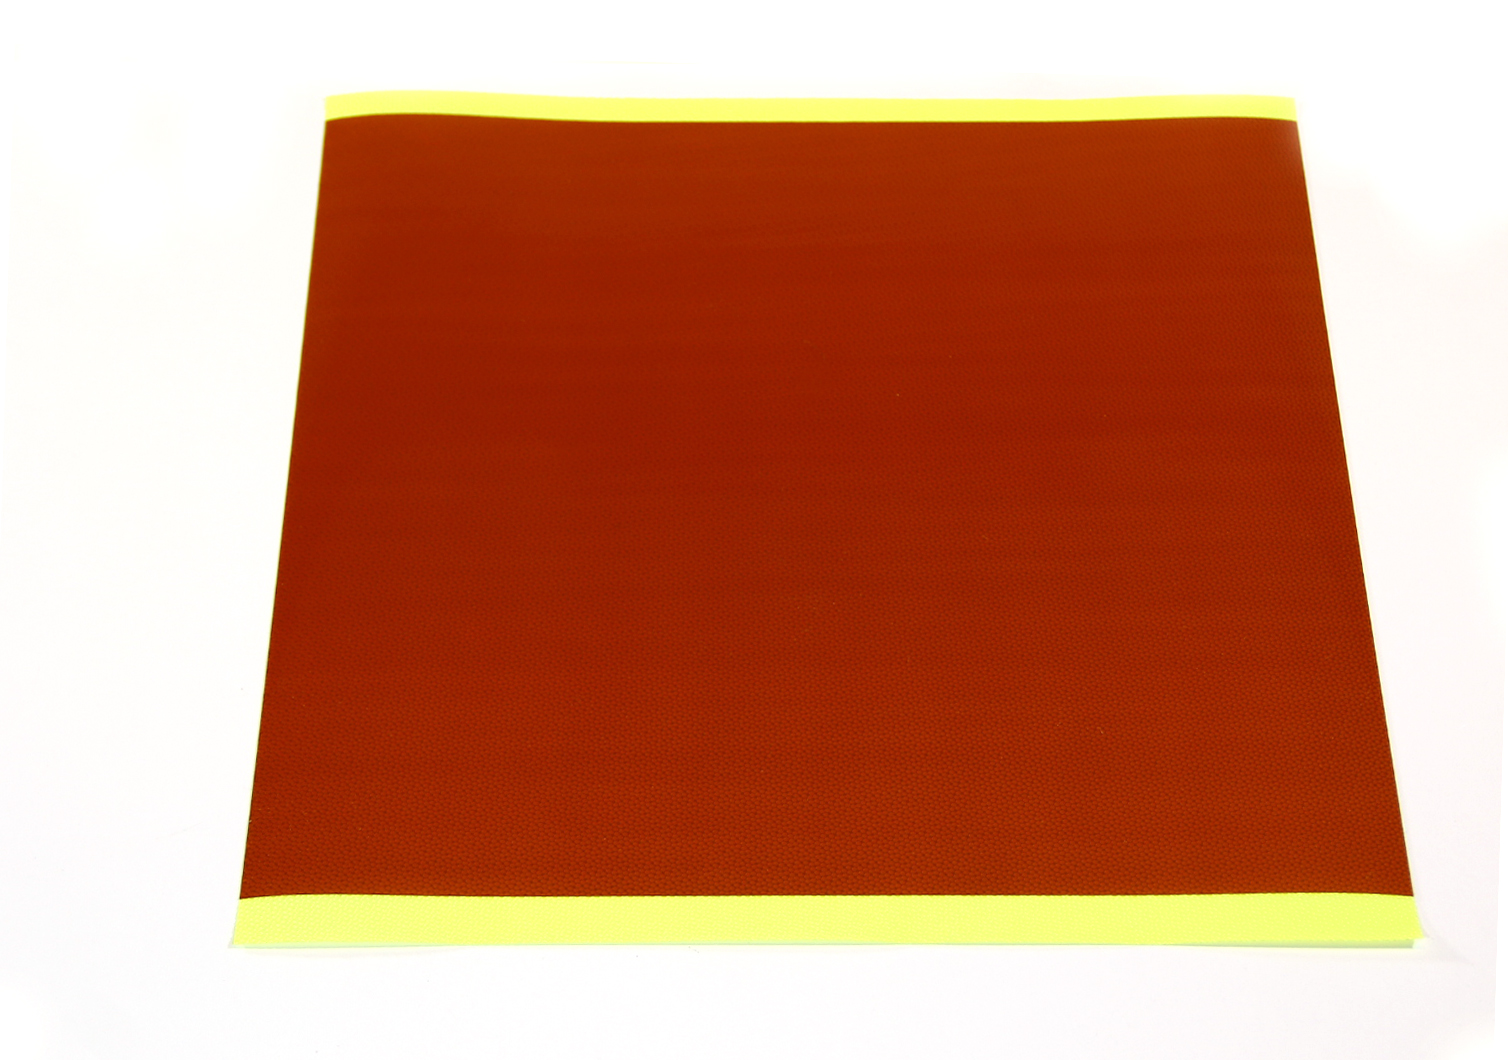 6.125 x 36 Yards Kapton 18-1S Polyimide Tape with Silicone Adhesive 